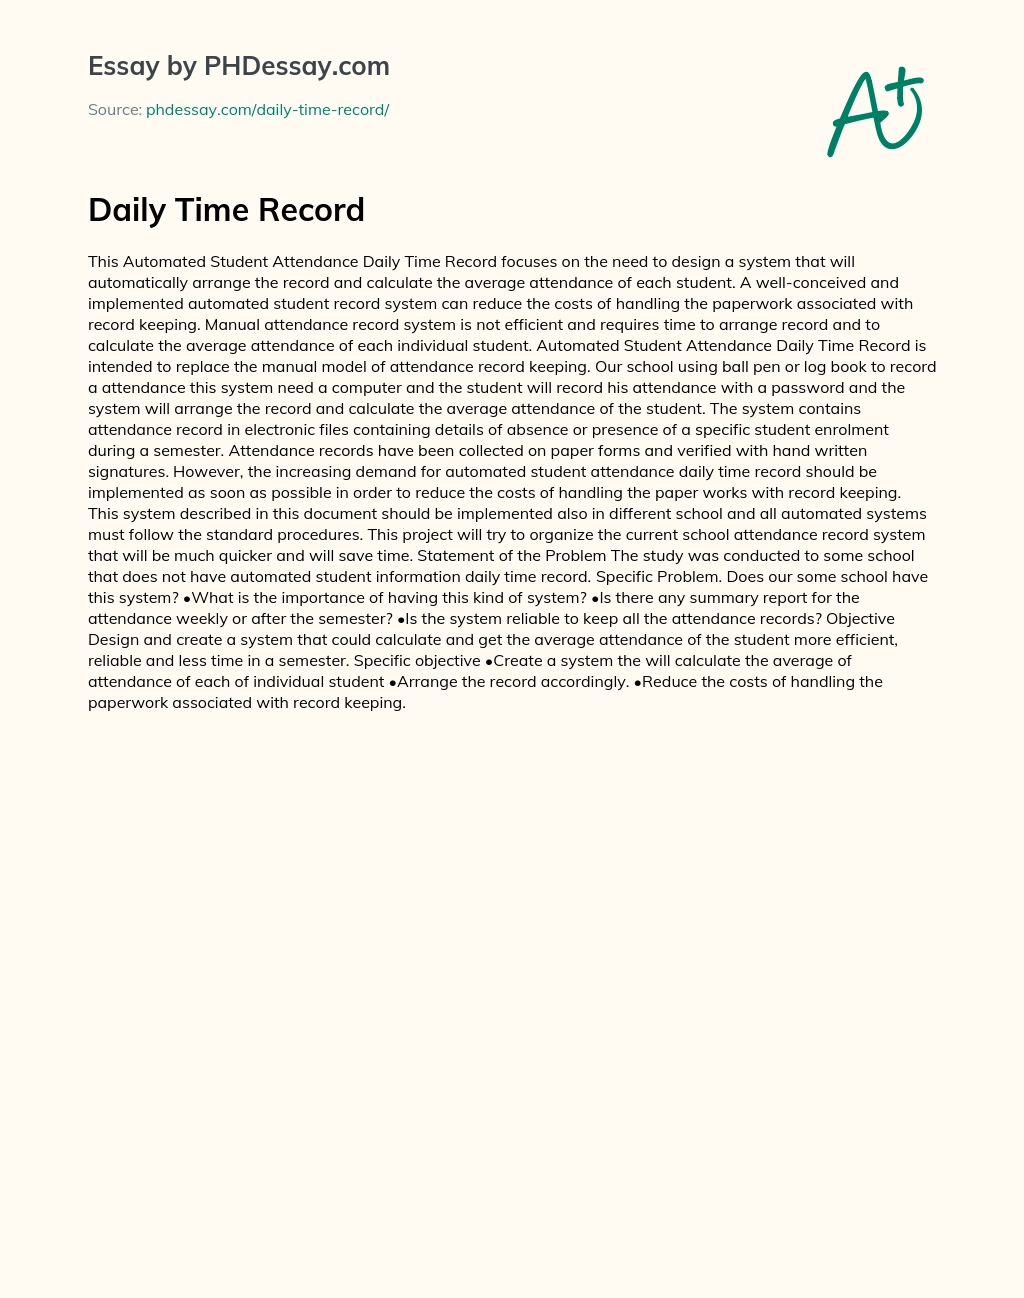 Daily Time Record essay